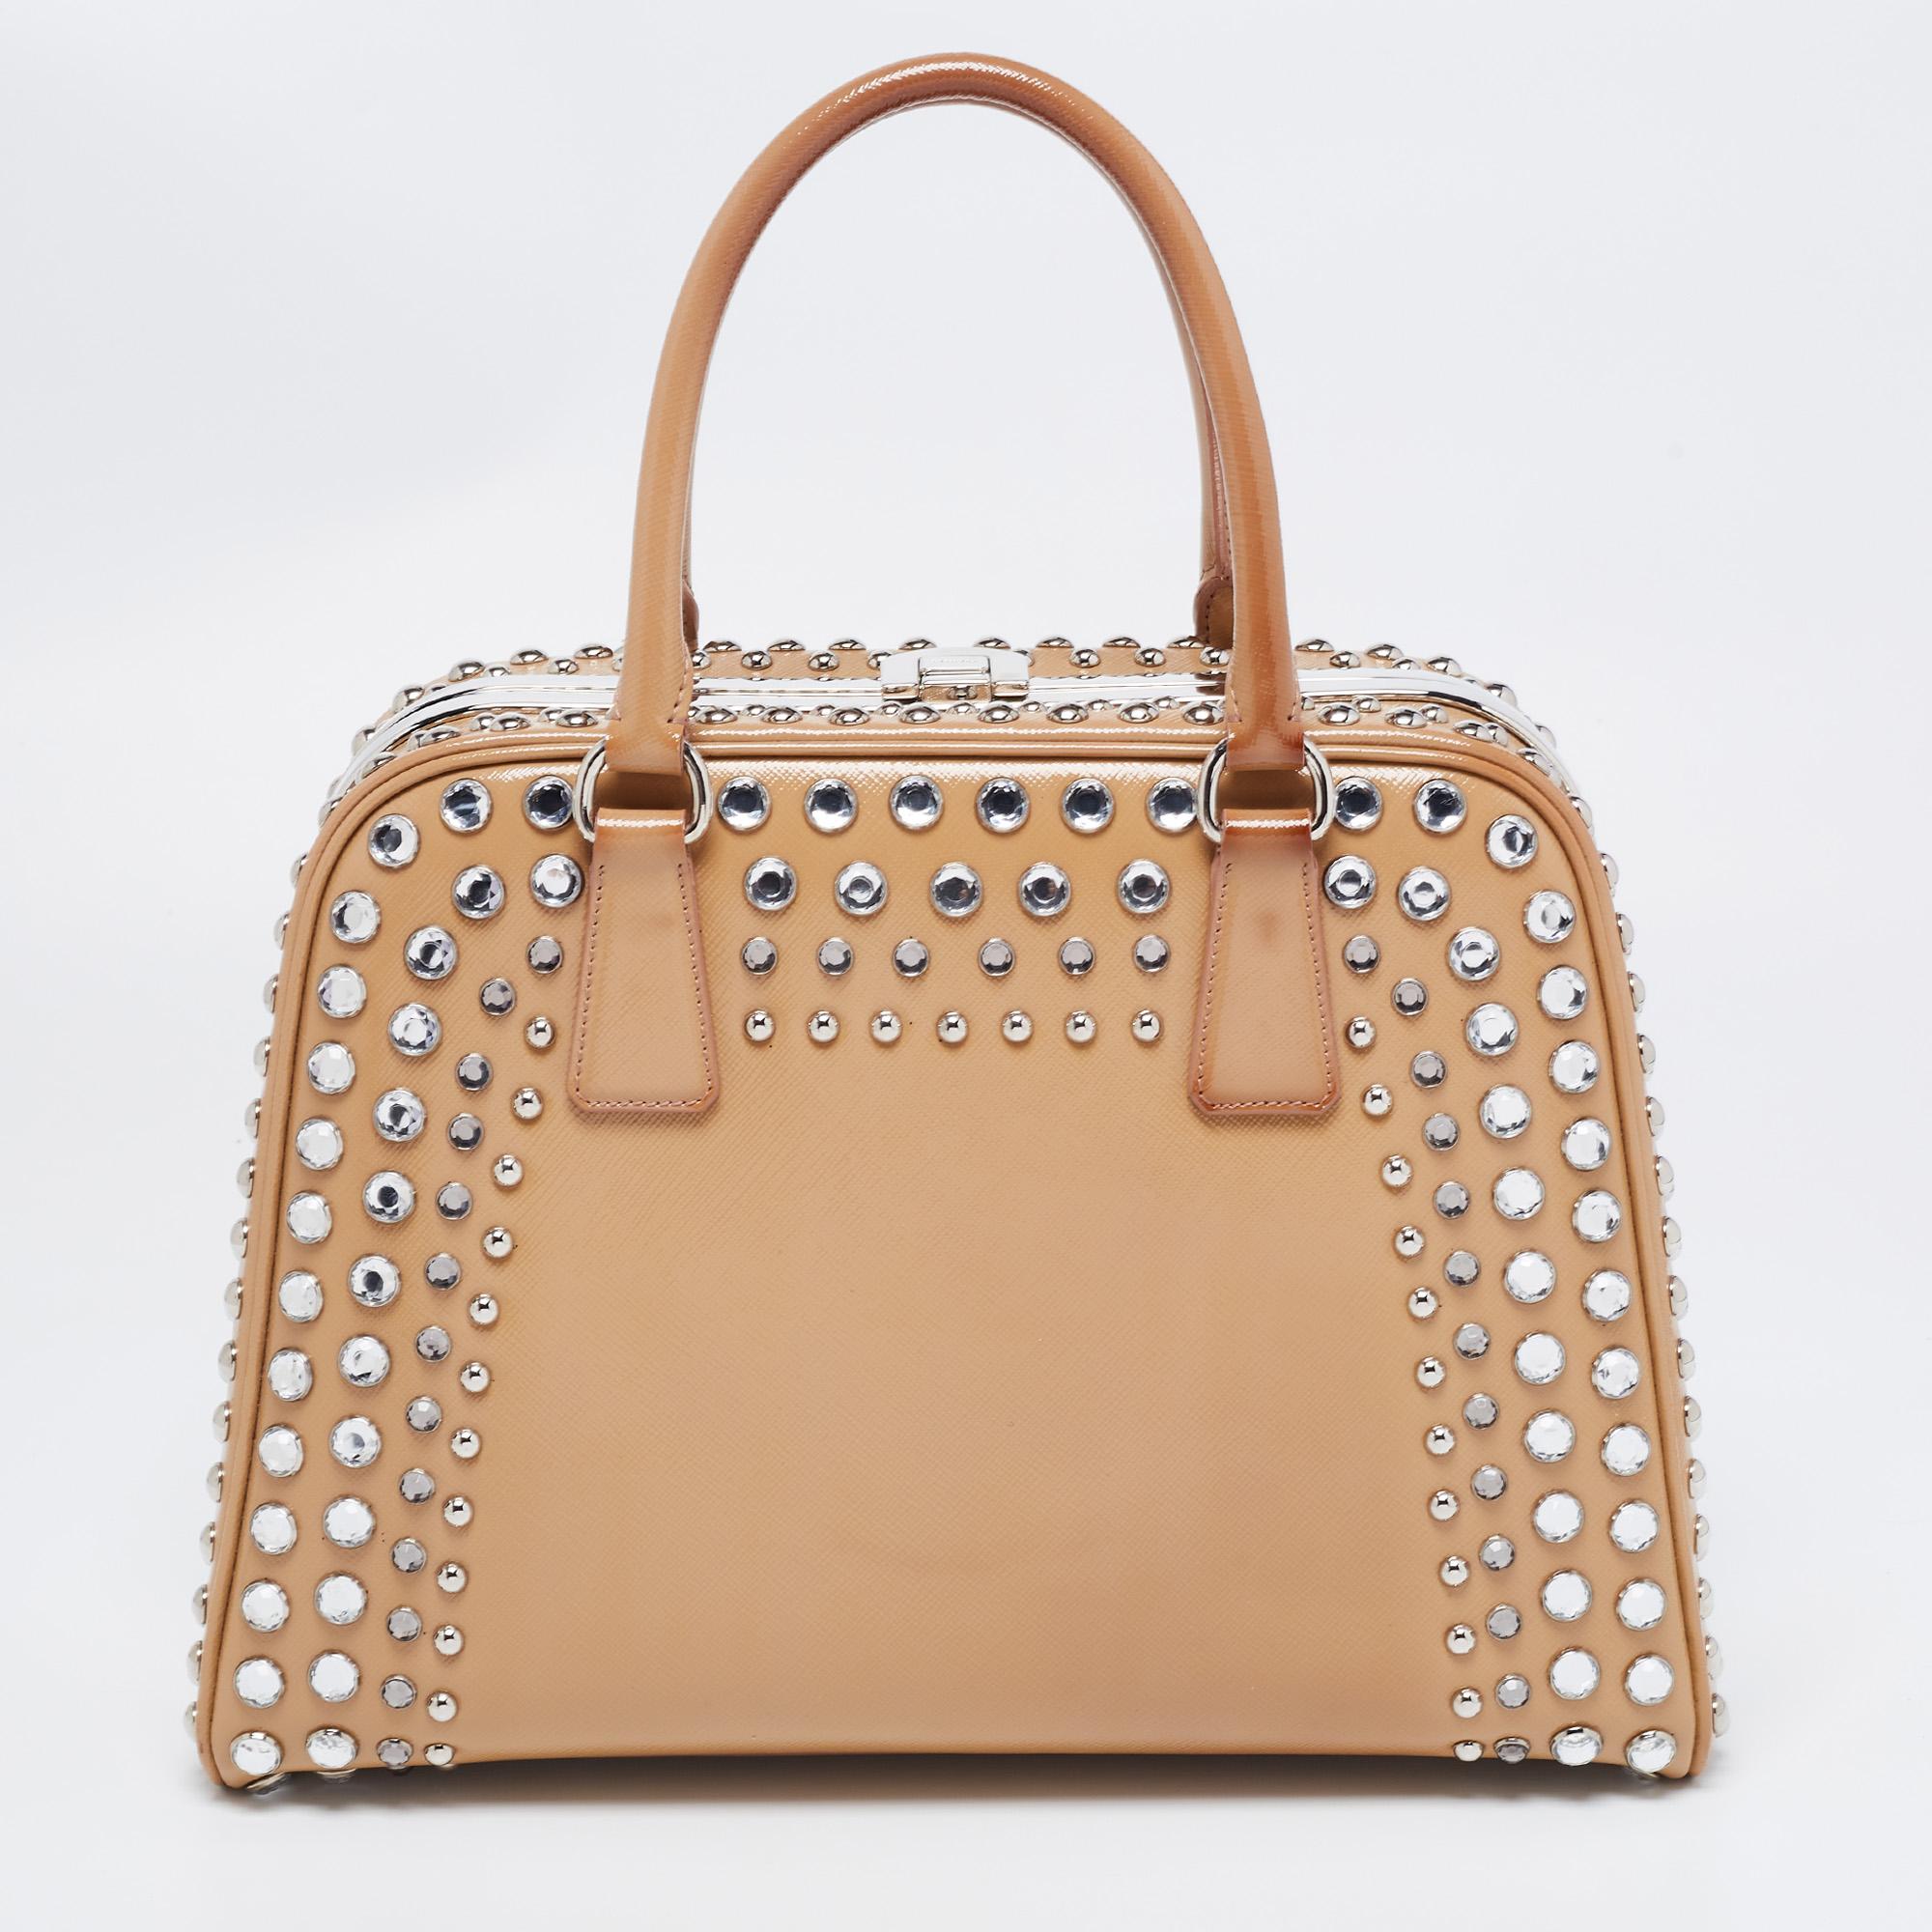 Giving handle bags an elegant update, this Pyramid Frame satchel by Prada aims to be a valuable addition to your closet. It is crafted from Saffiano patent leather and styled with studded embellishments. It comes with dual top handles, protective